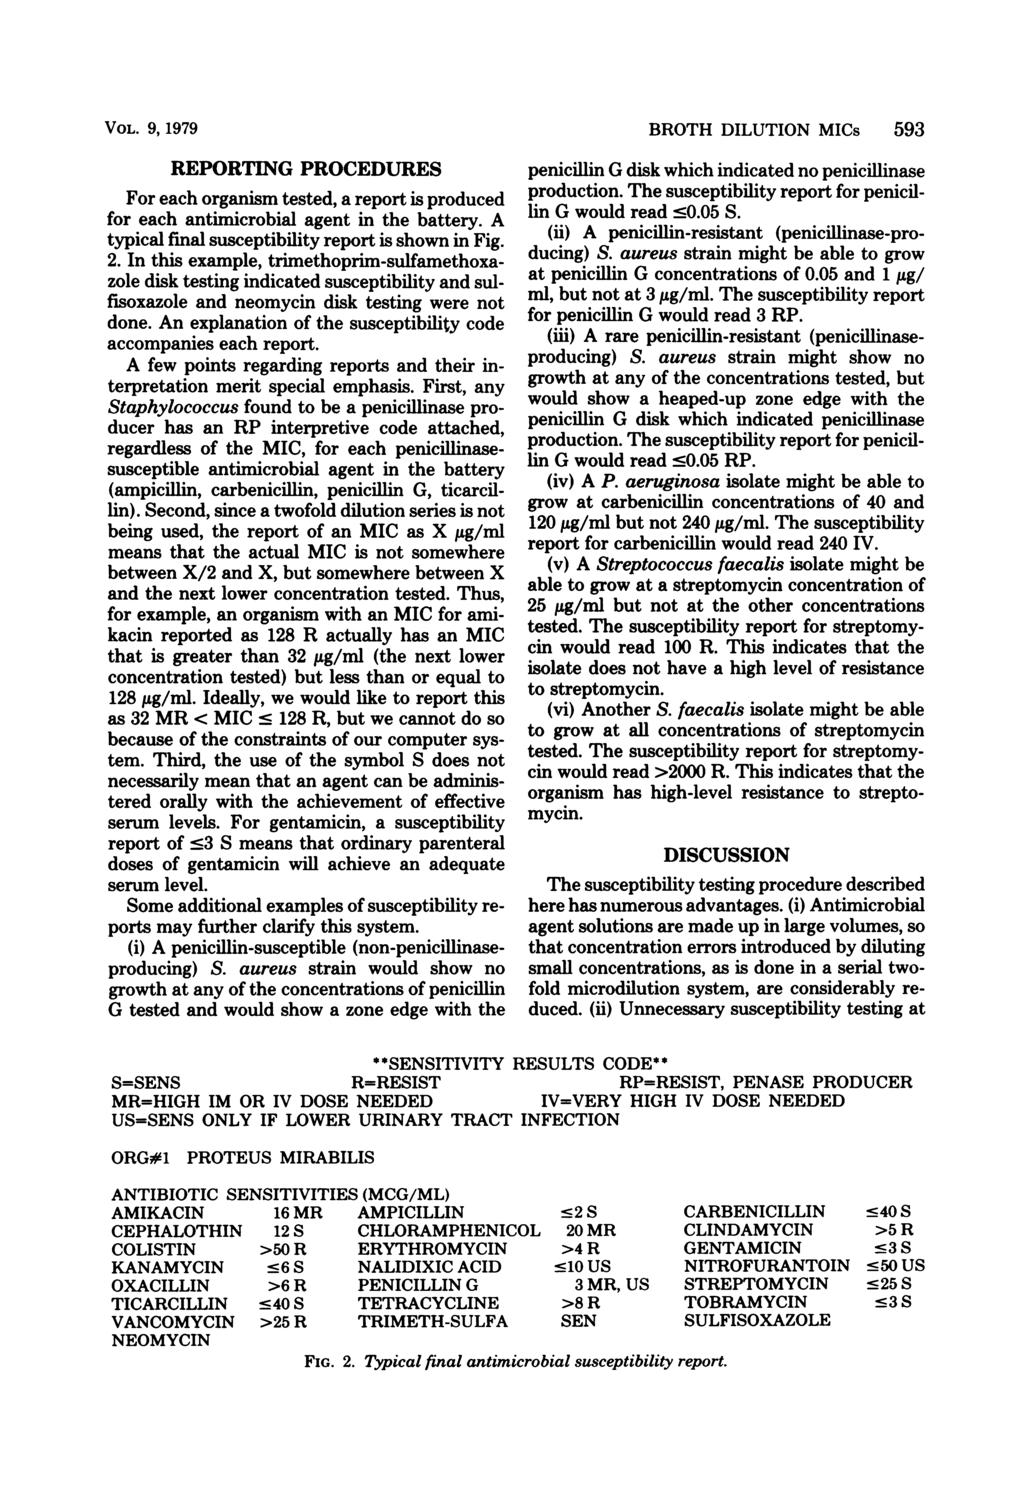 VOL. 9, 1979 EPOTING POCEDUES For each organism tested, a report is produced for each antimicrobial agent in the battery. A typical final susceptibility report is shown in Fig. 2.